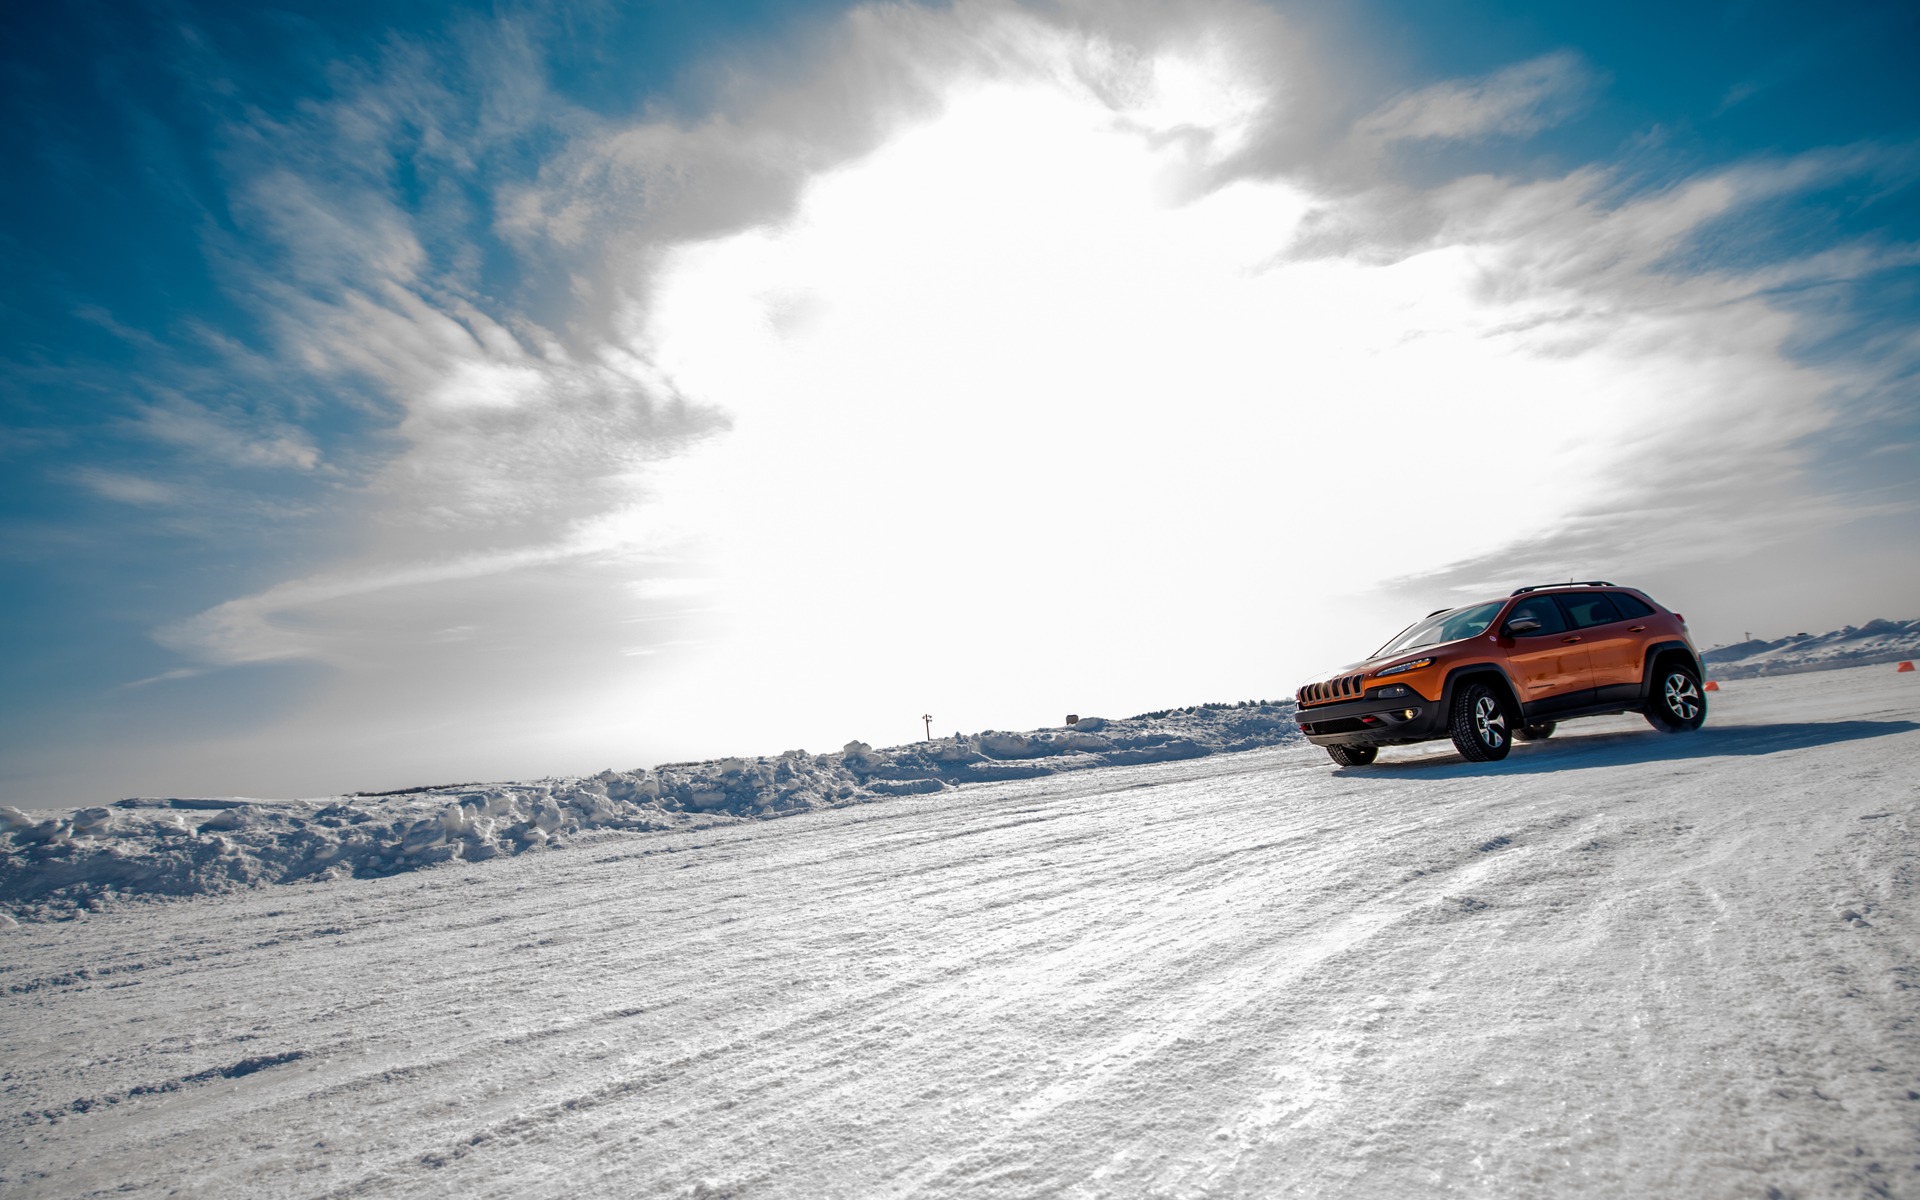 ICAR is flat, which makes for excellent drift conditions.